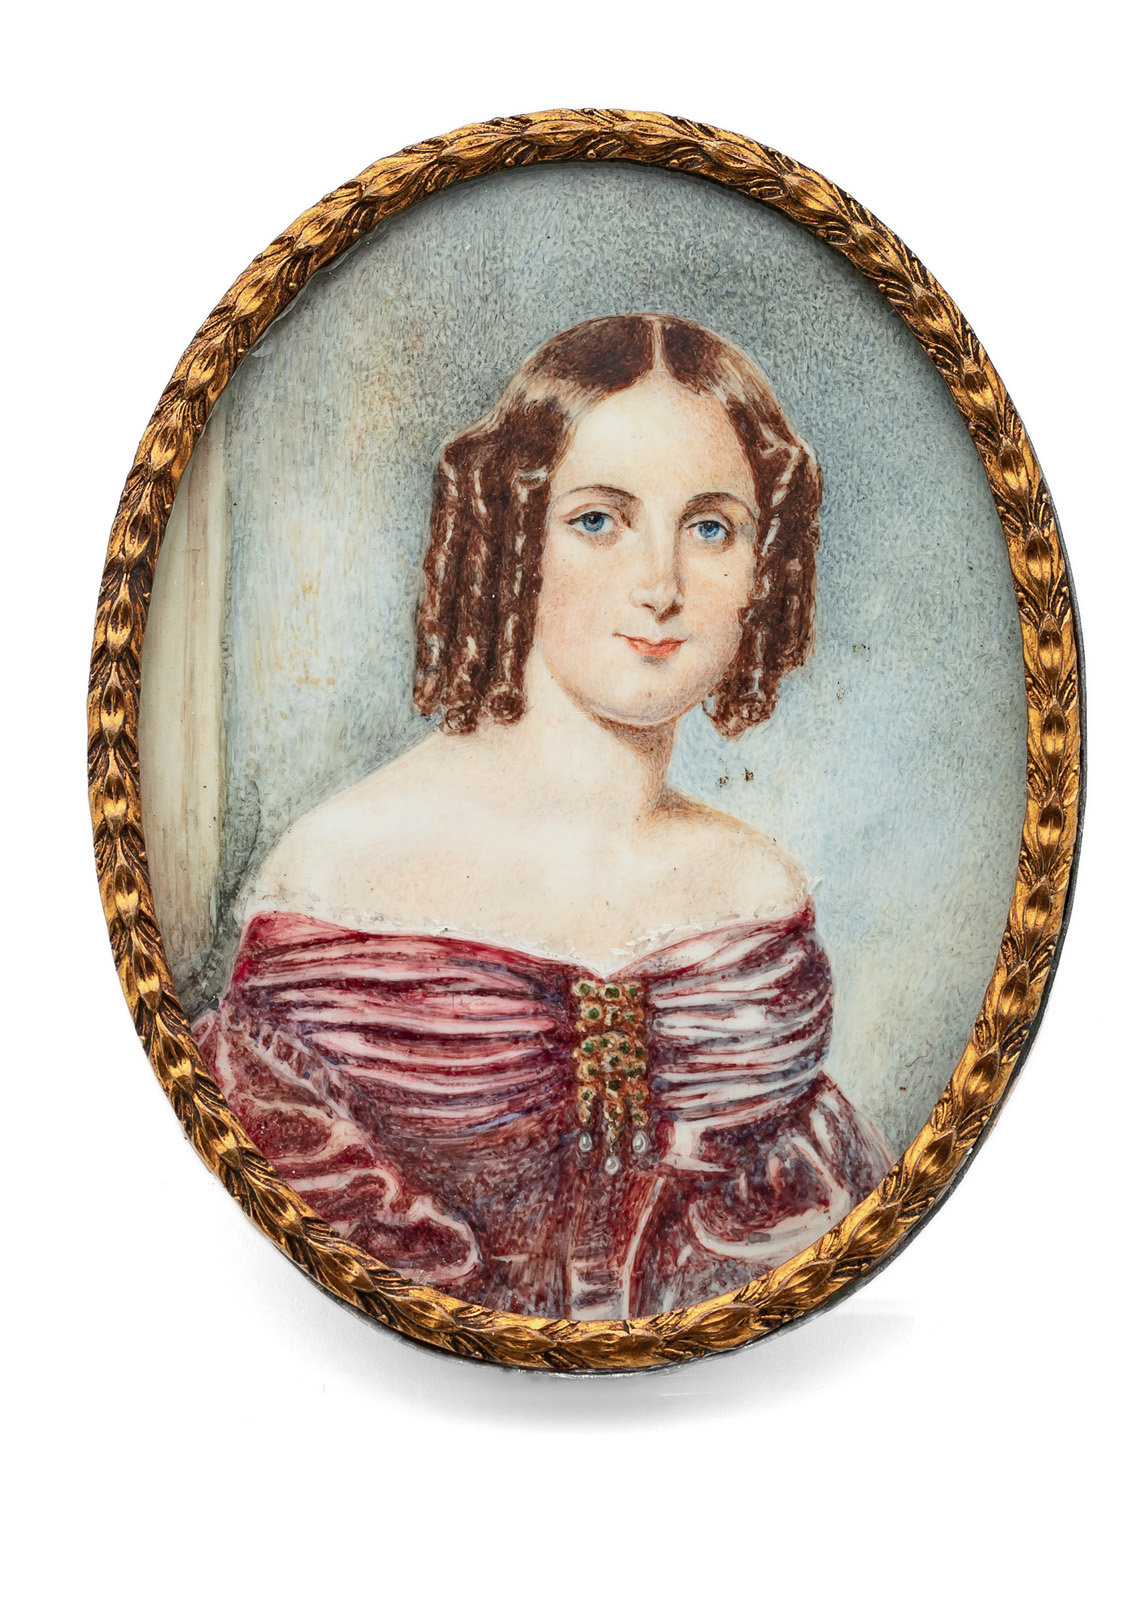 A MINIATURE PORTRAIT OF A YOUNG LADY IN A RED DRESS AND CORSAGE BROOCH - Image 2 of 4